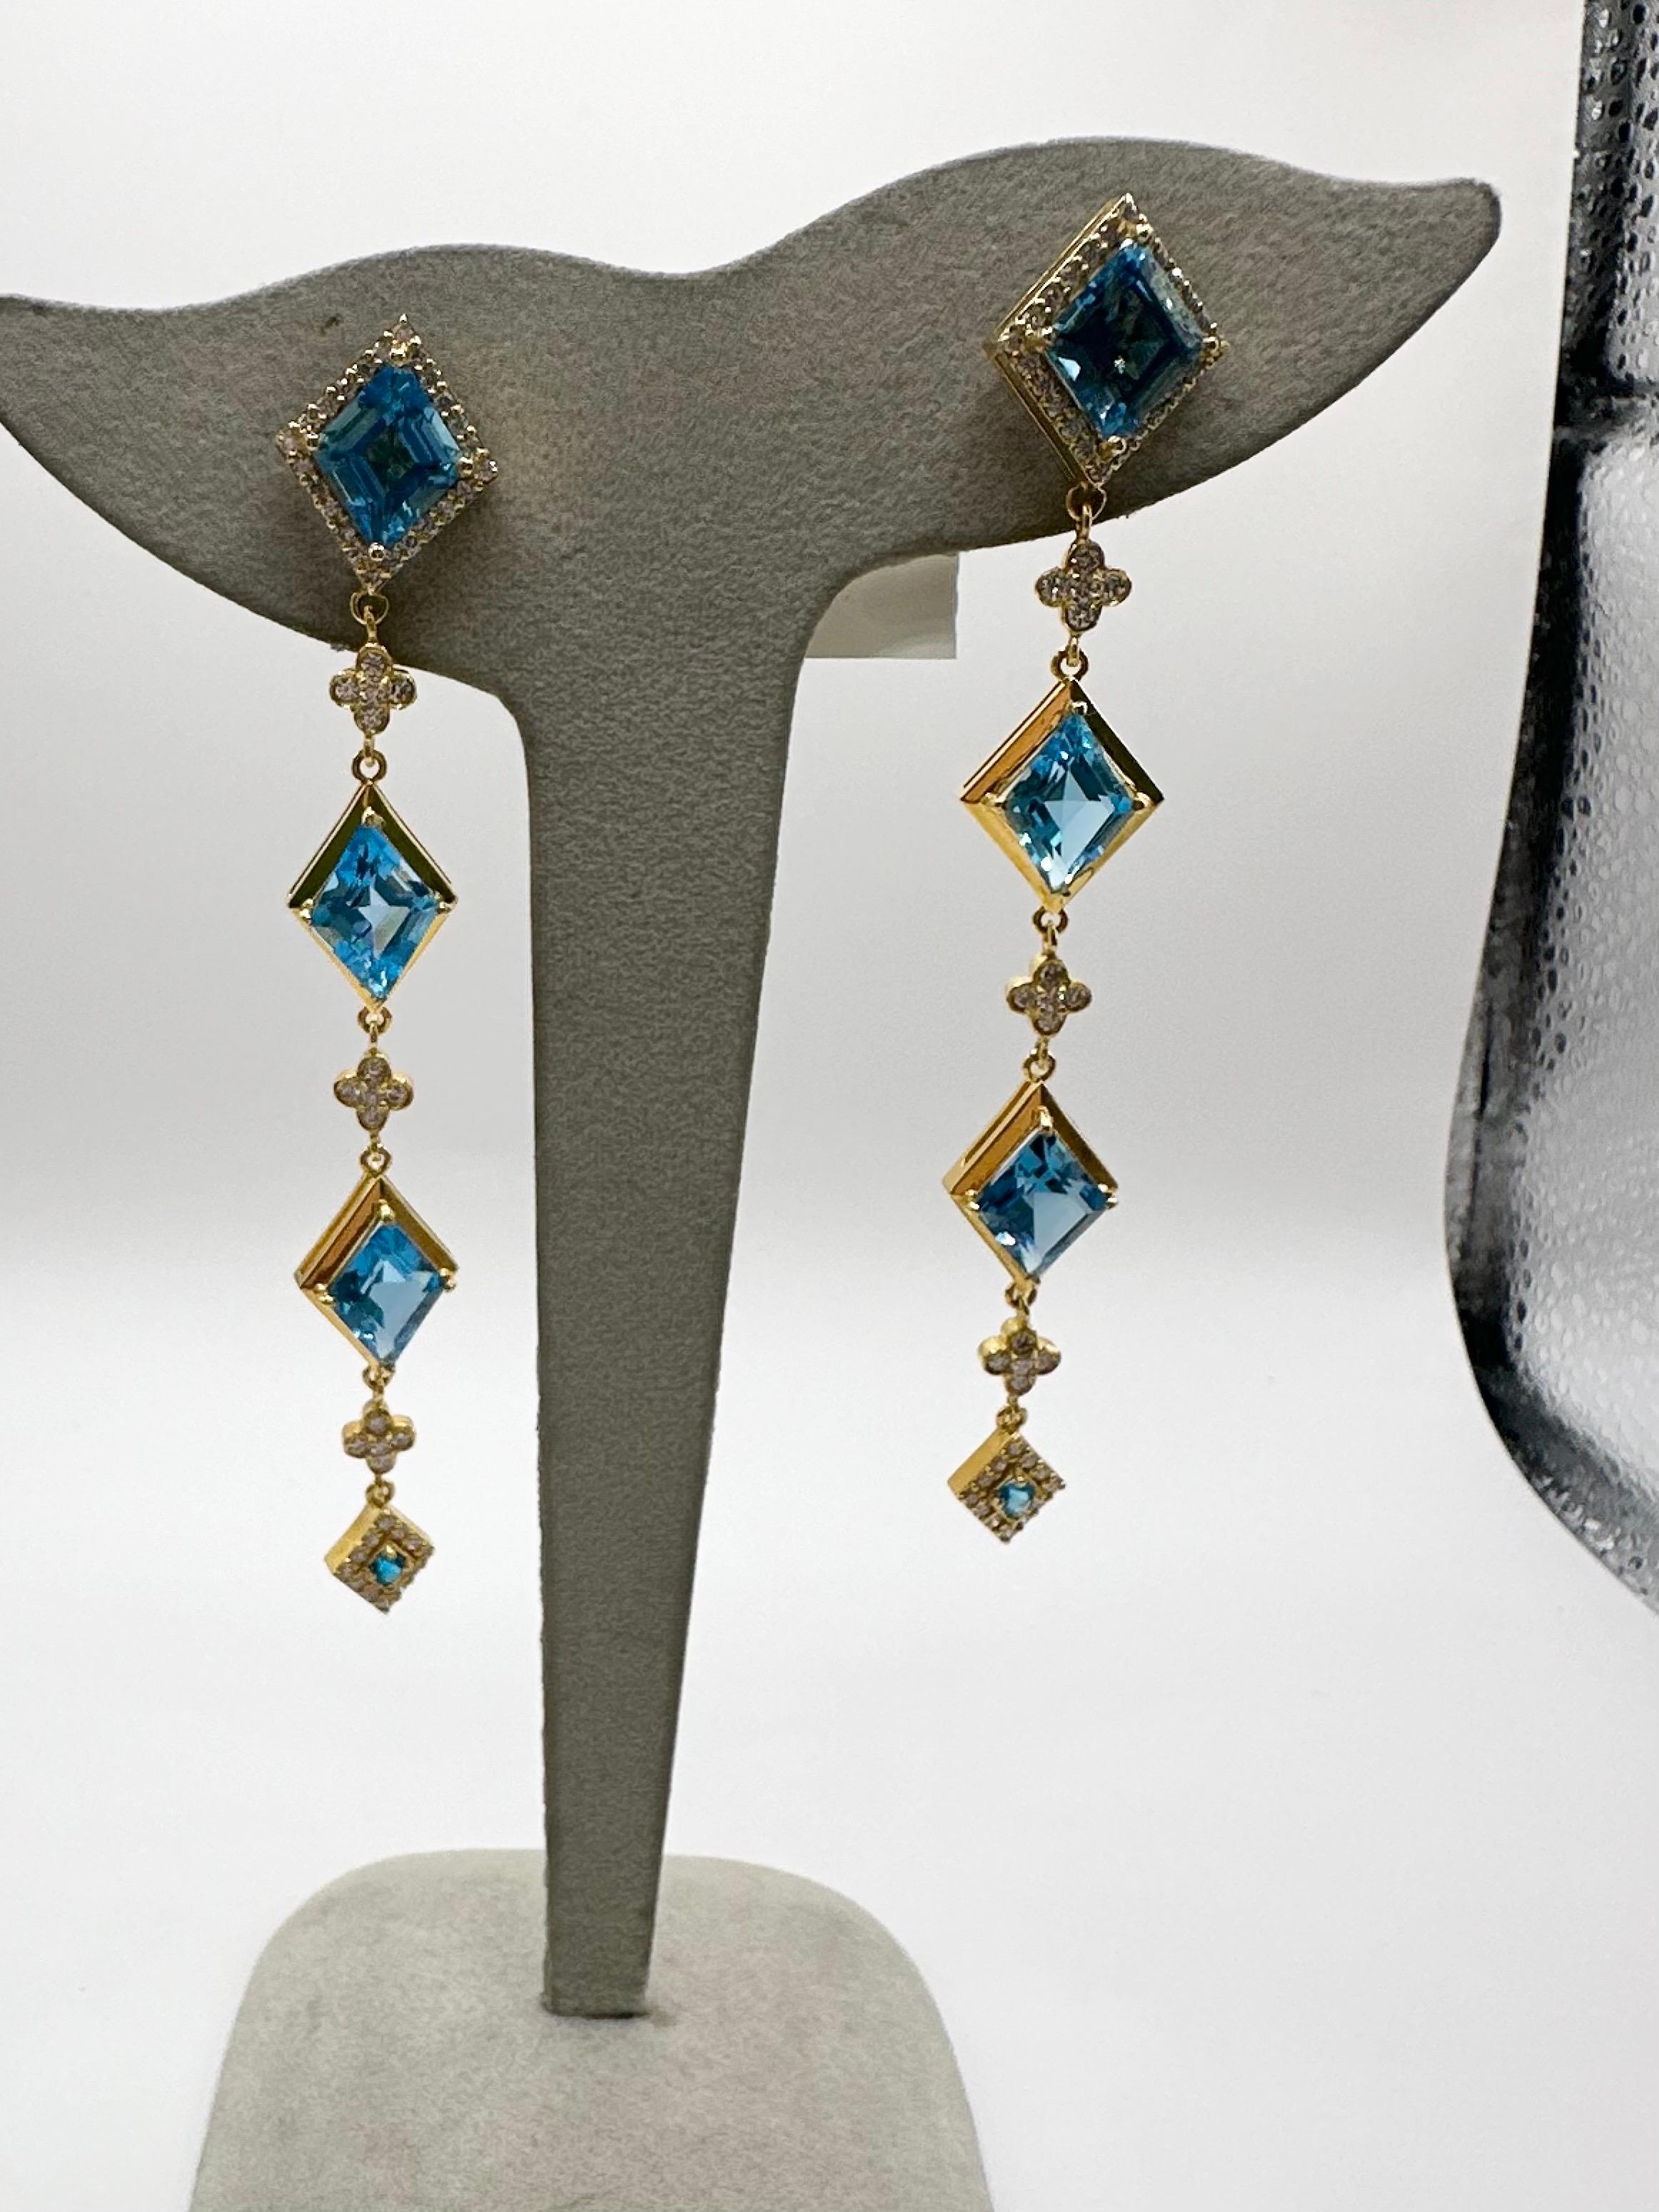 Stunning Topaz earrings in 18KT solid gold! One of a kind custom cut topaz in long dangling syle! So perfect with jeans or a dress! 1 carat of fine quality diamonds VS clarity and F-G color and fine quality topaz weighing more than 13